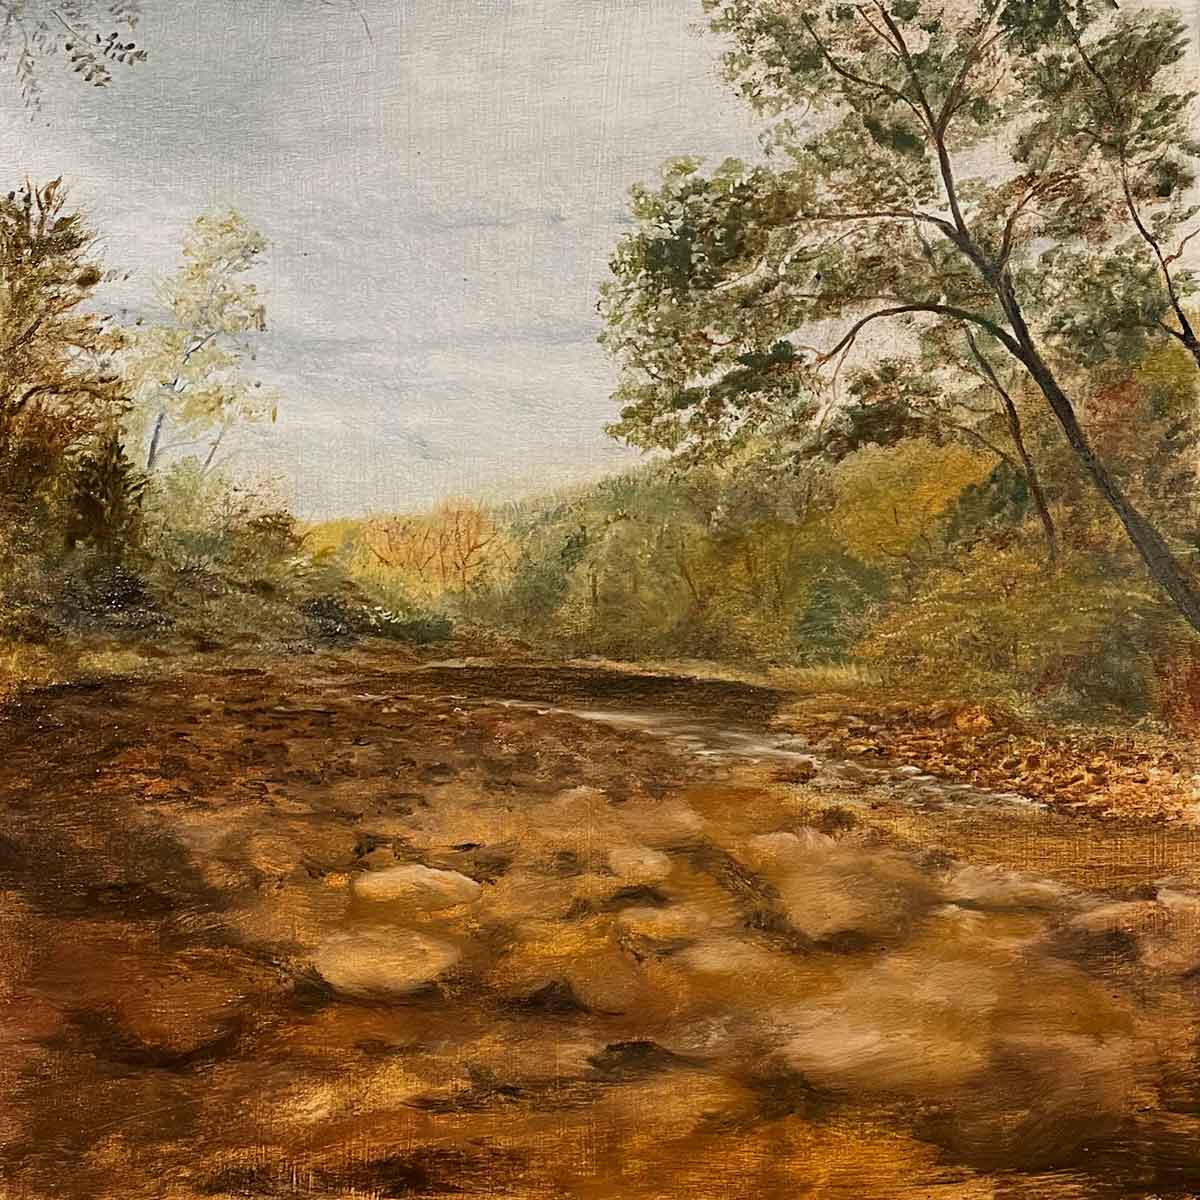 Getting closer to finished with this study of Felkins creek in Ozark pigments. Busy times at Wild Ozark these days!